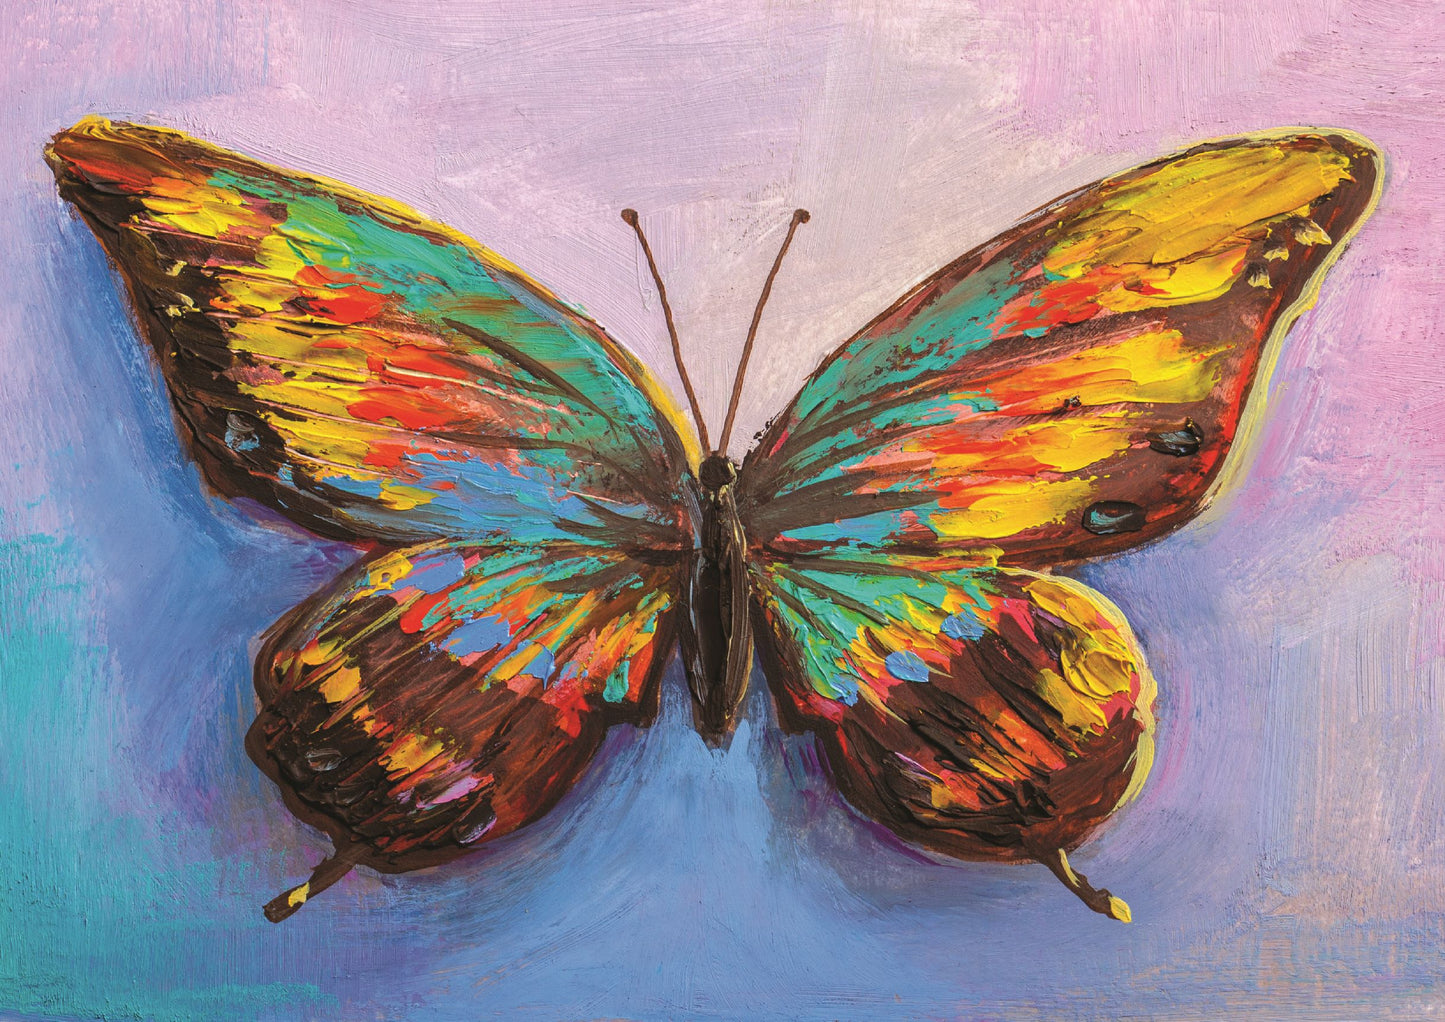 Oil Painting of a Beautiful Butterfly